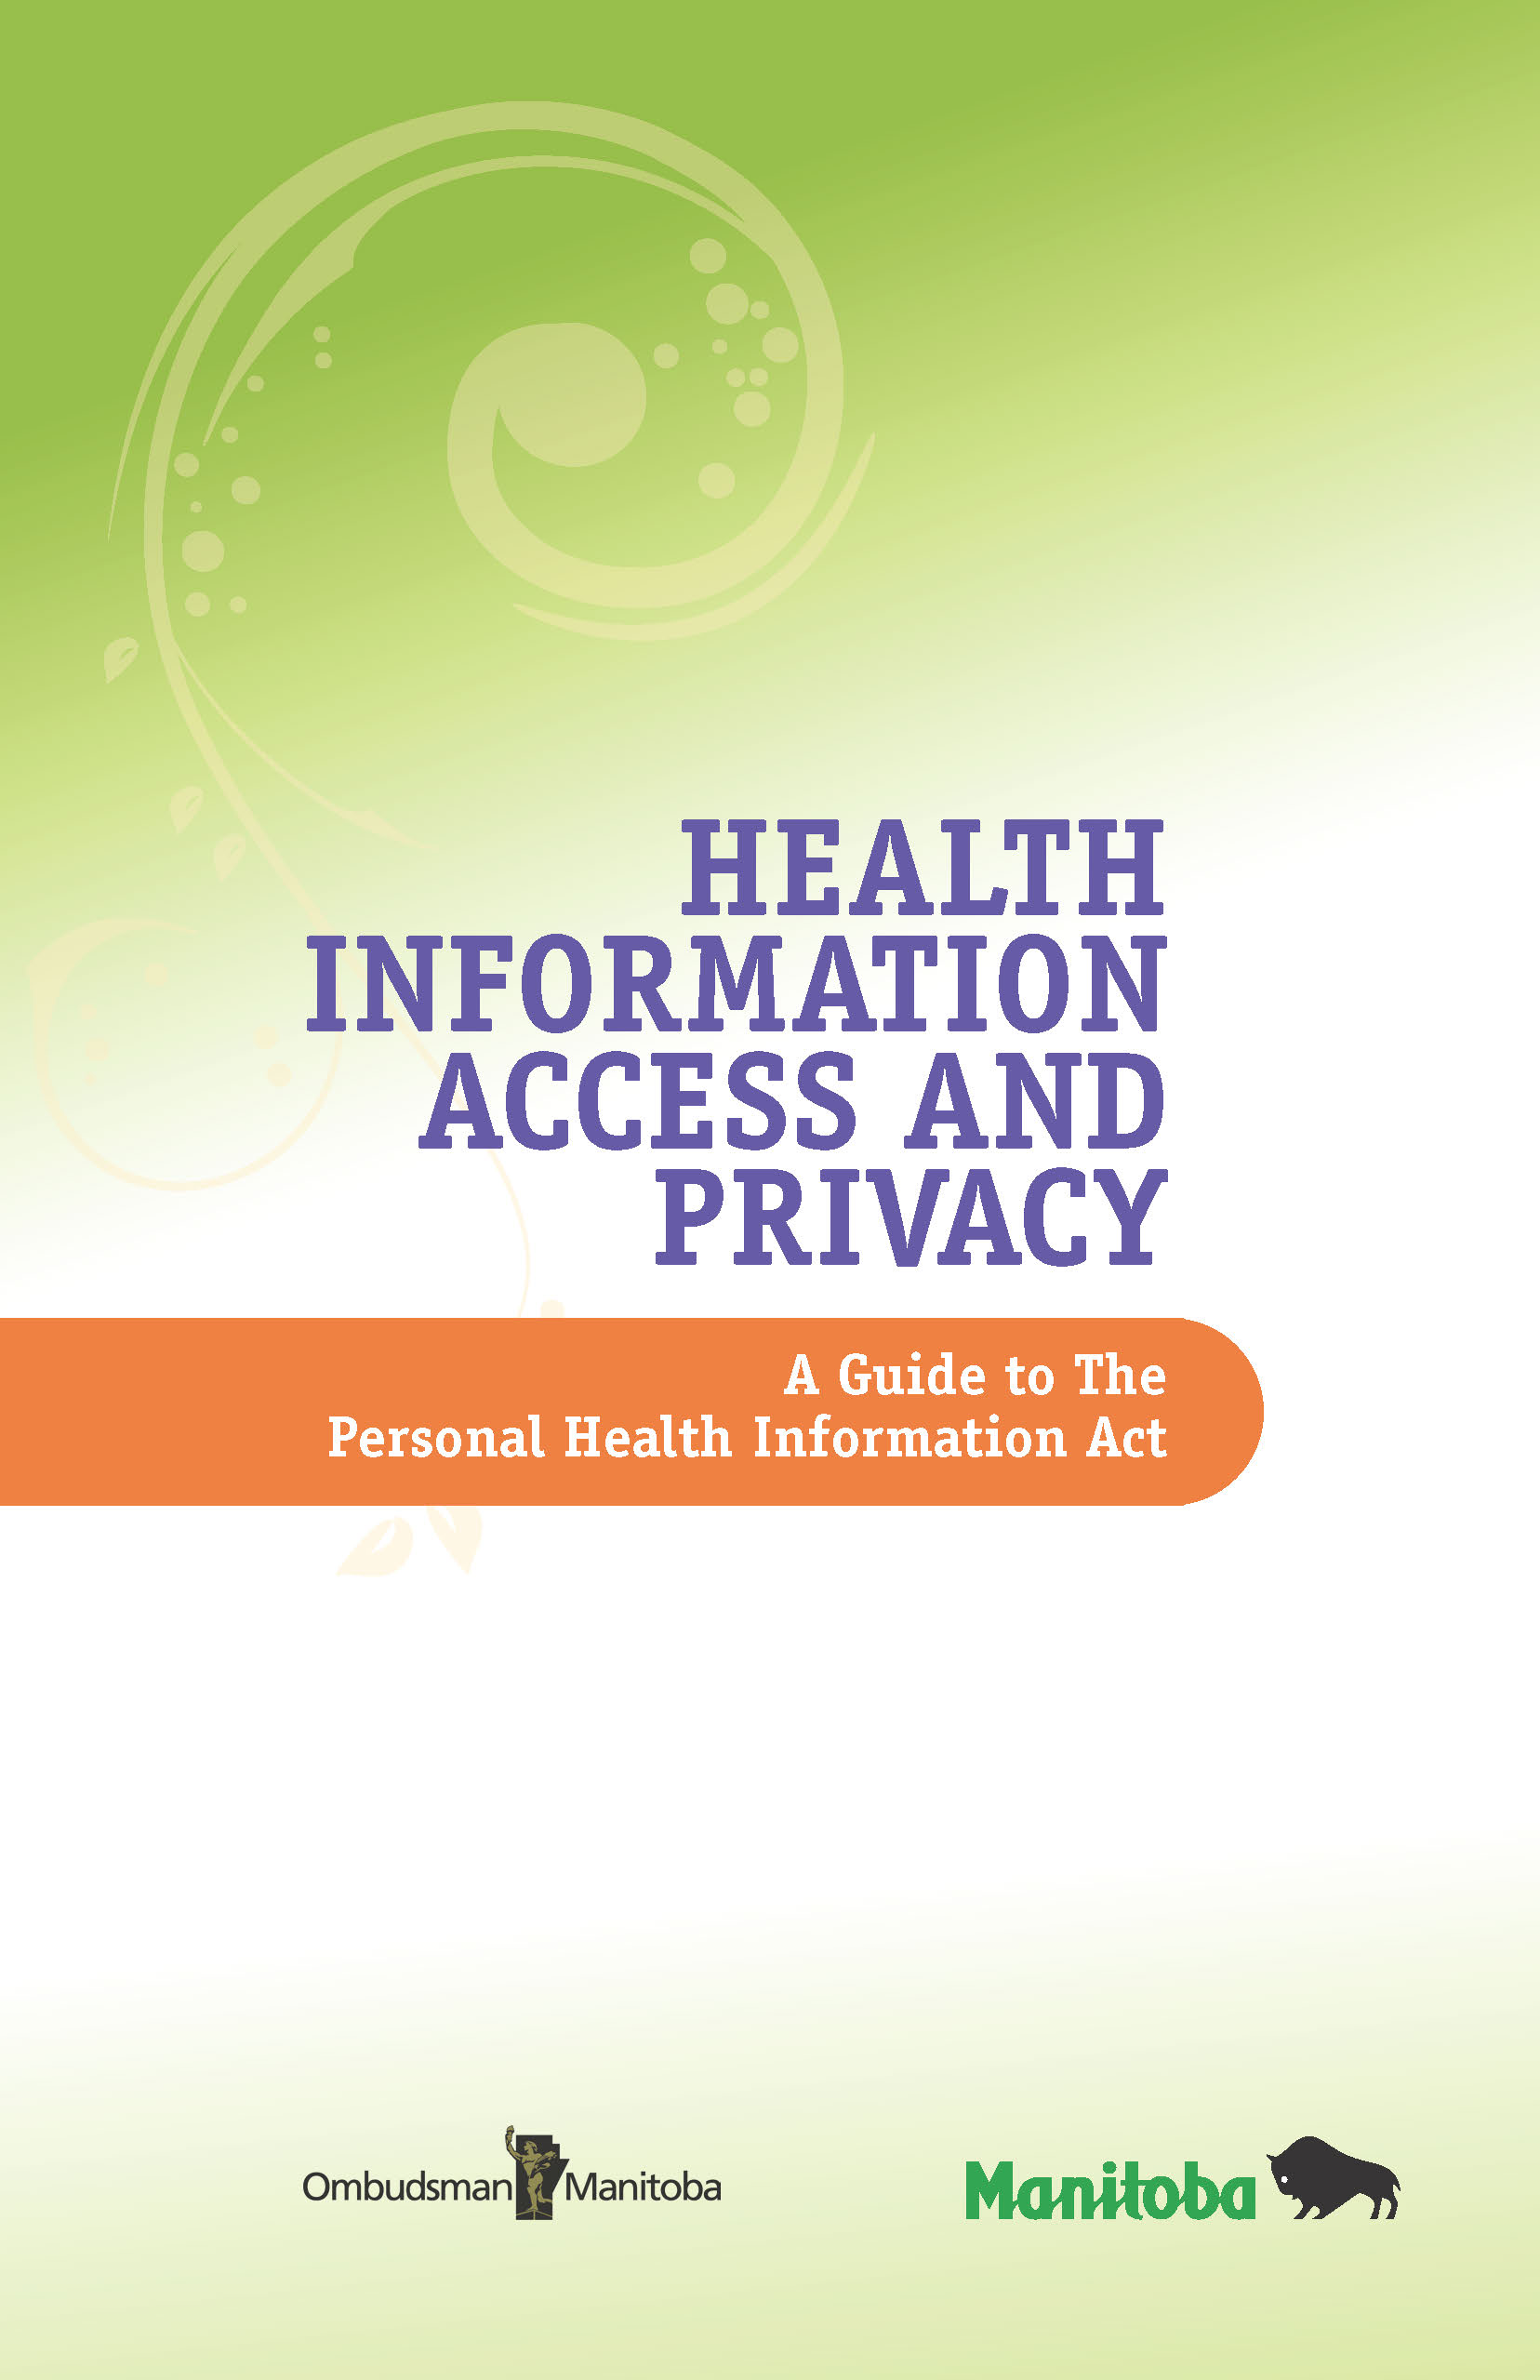 A Guide to the Personal Health Information Act Booklet Cover (c) Ombudsman Manitoba